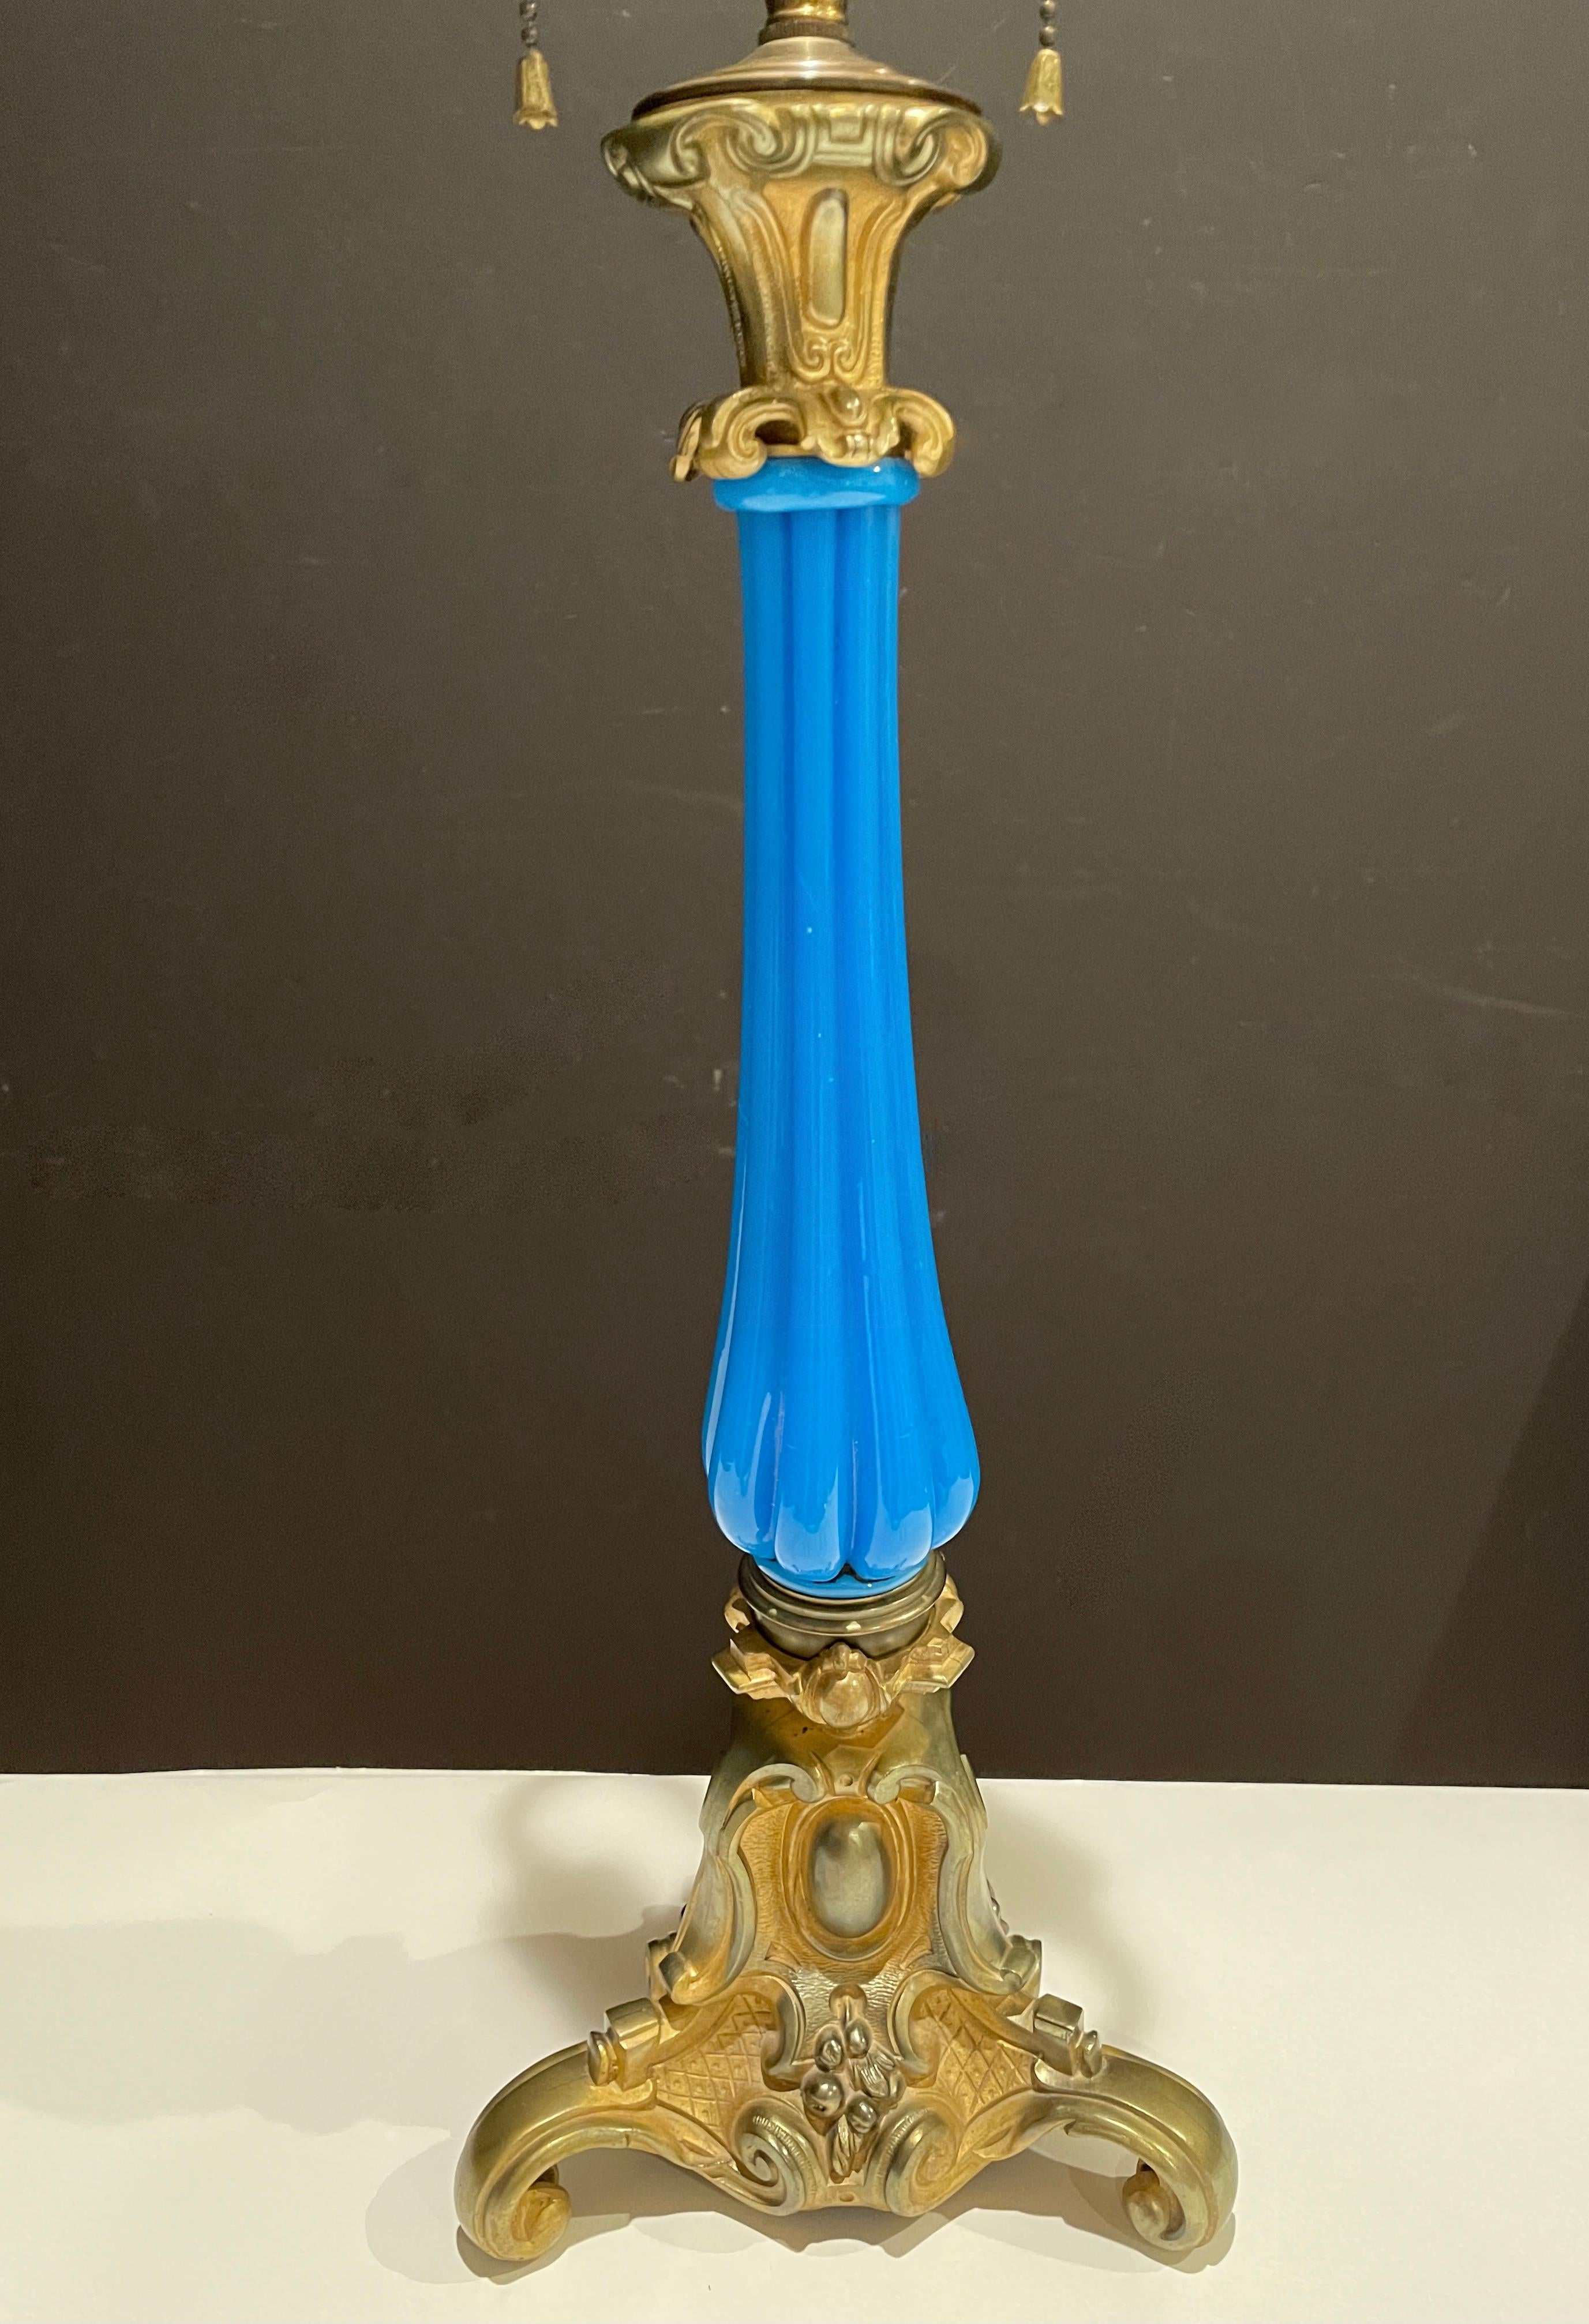 19th century French gilt bronze mounted blue opaline lamp. Blue opaline fluted glass column with decorative bronze base and cap.